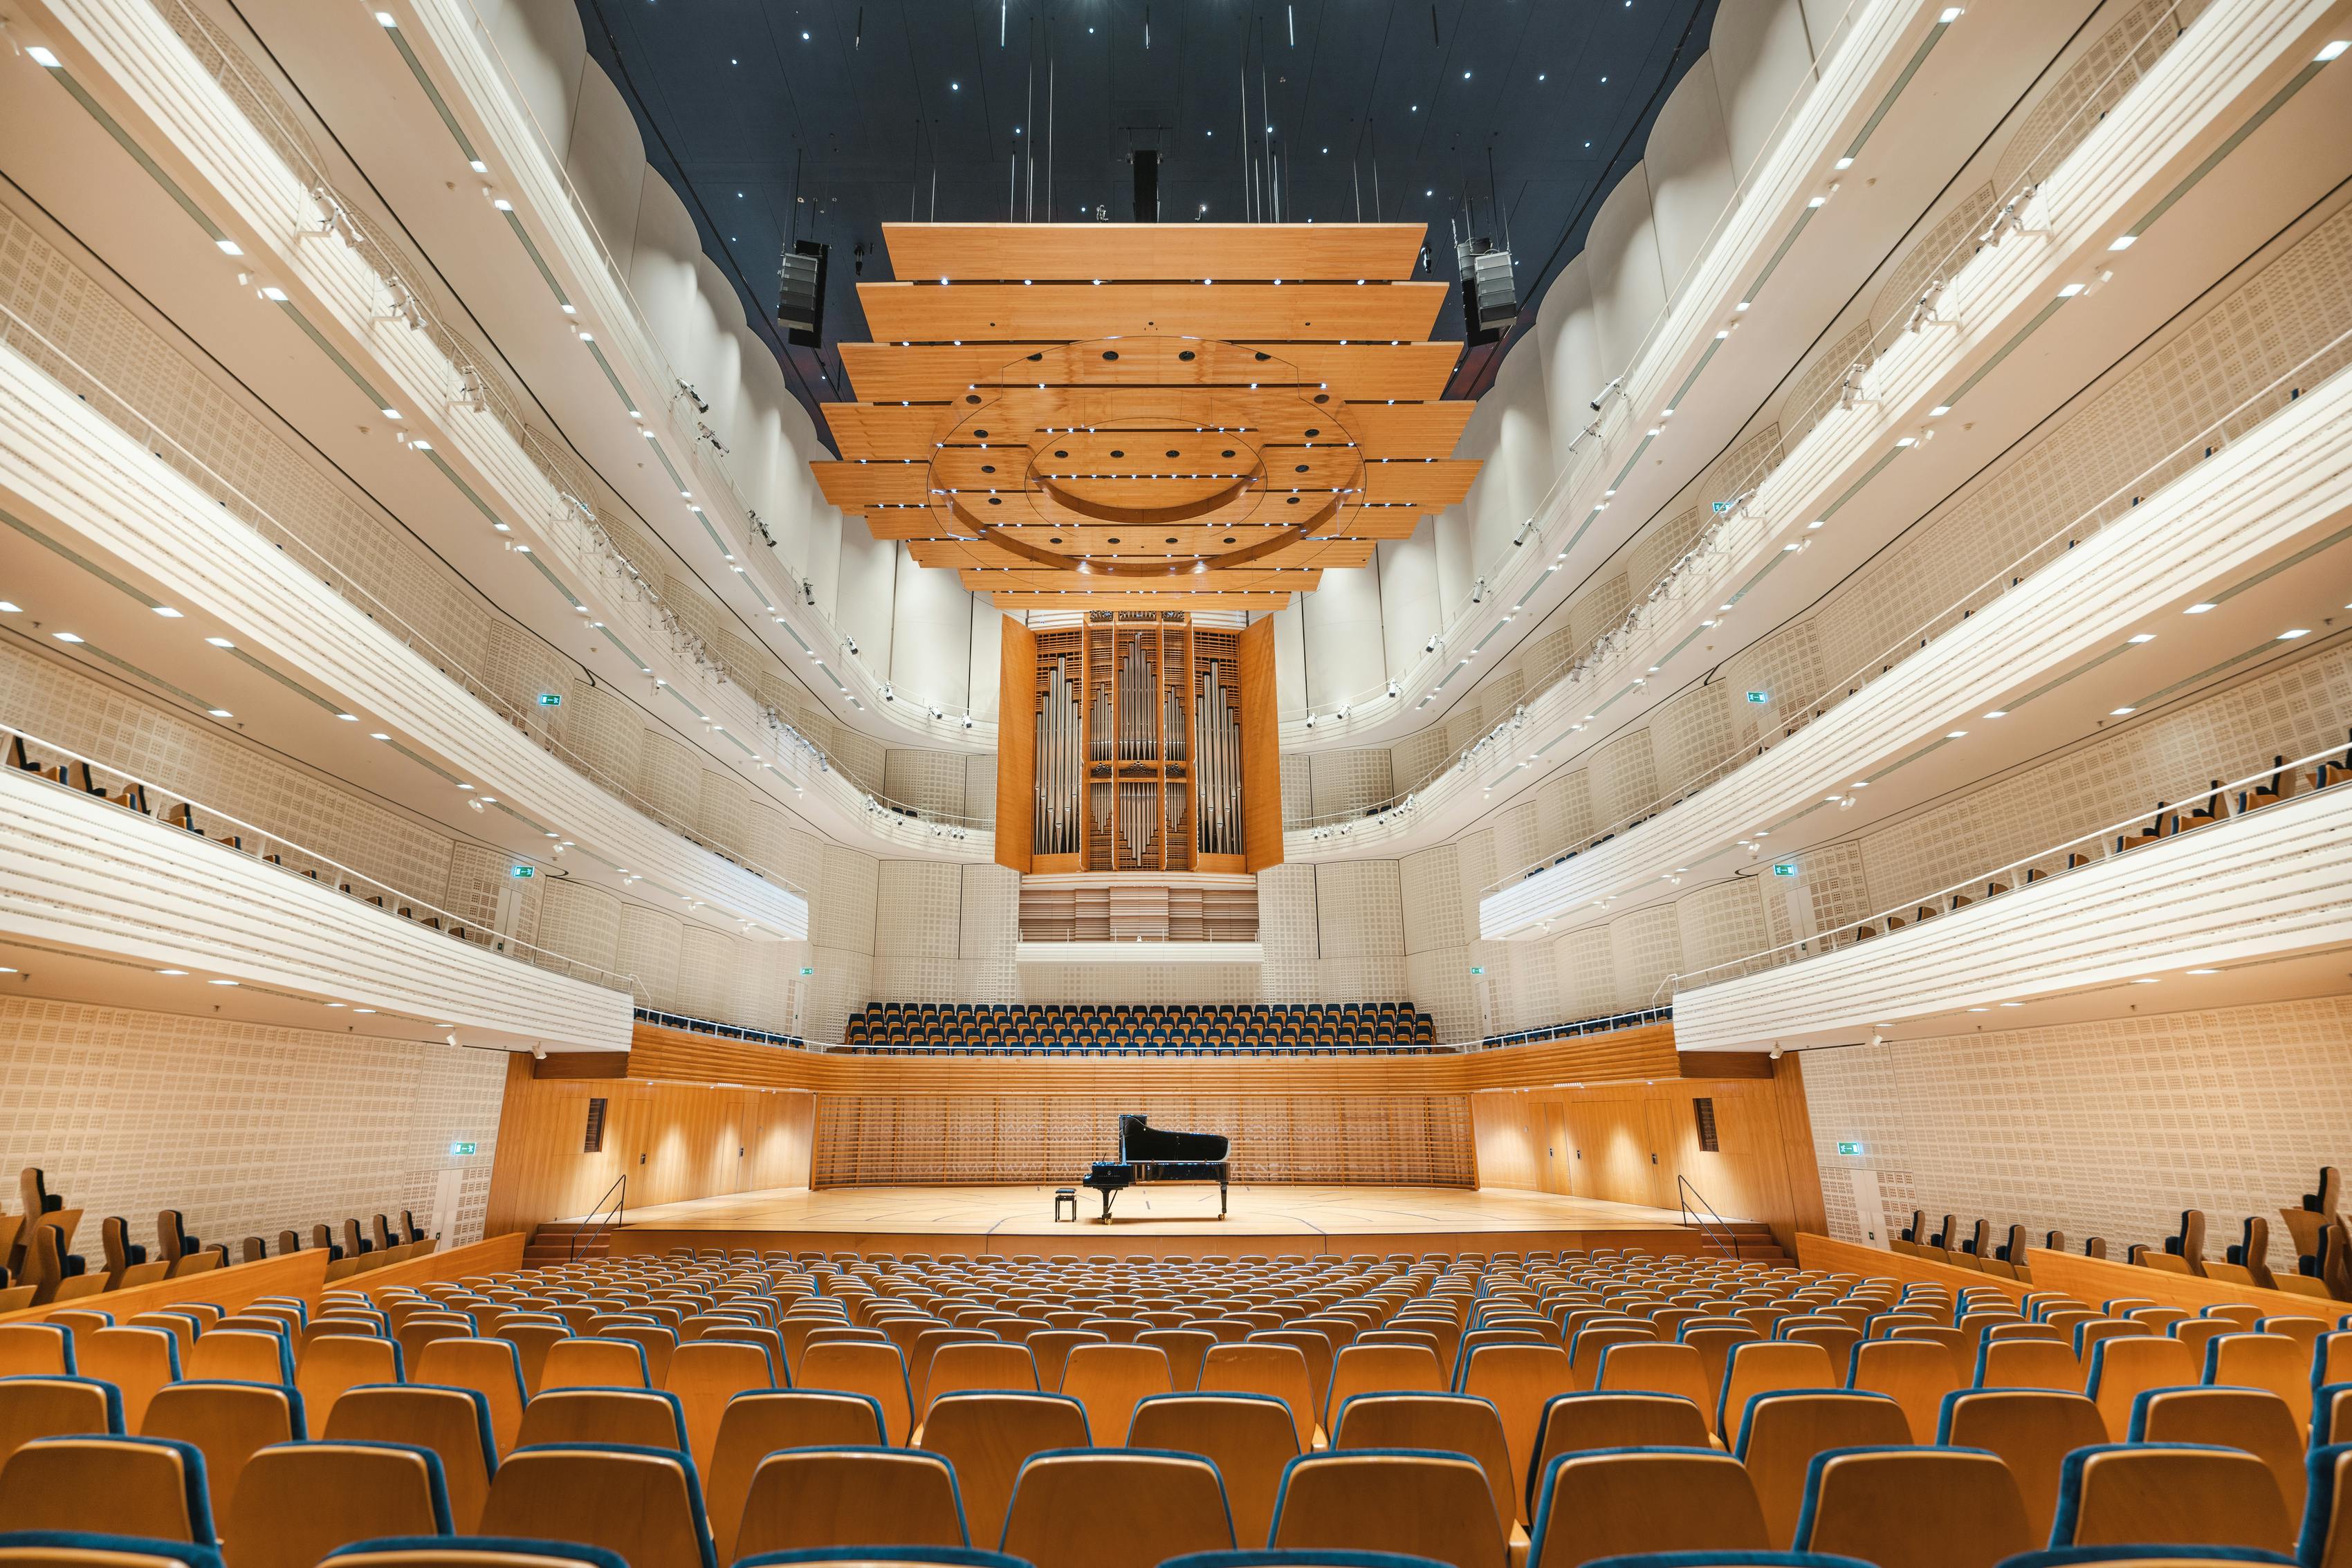 The Concert Hall at the KKL Luzern with a Grand Piano on the Stage